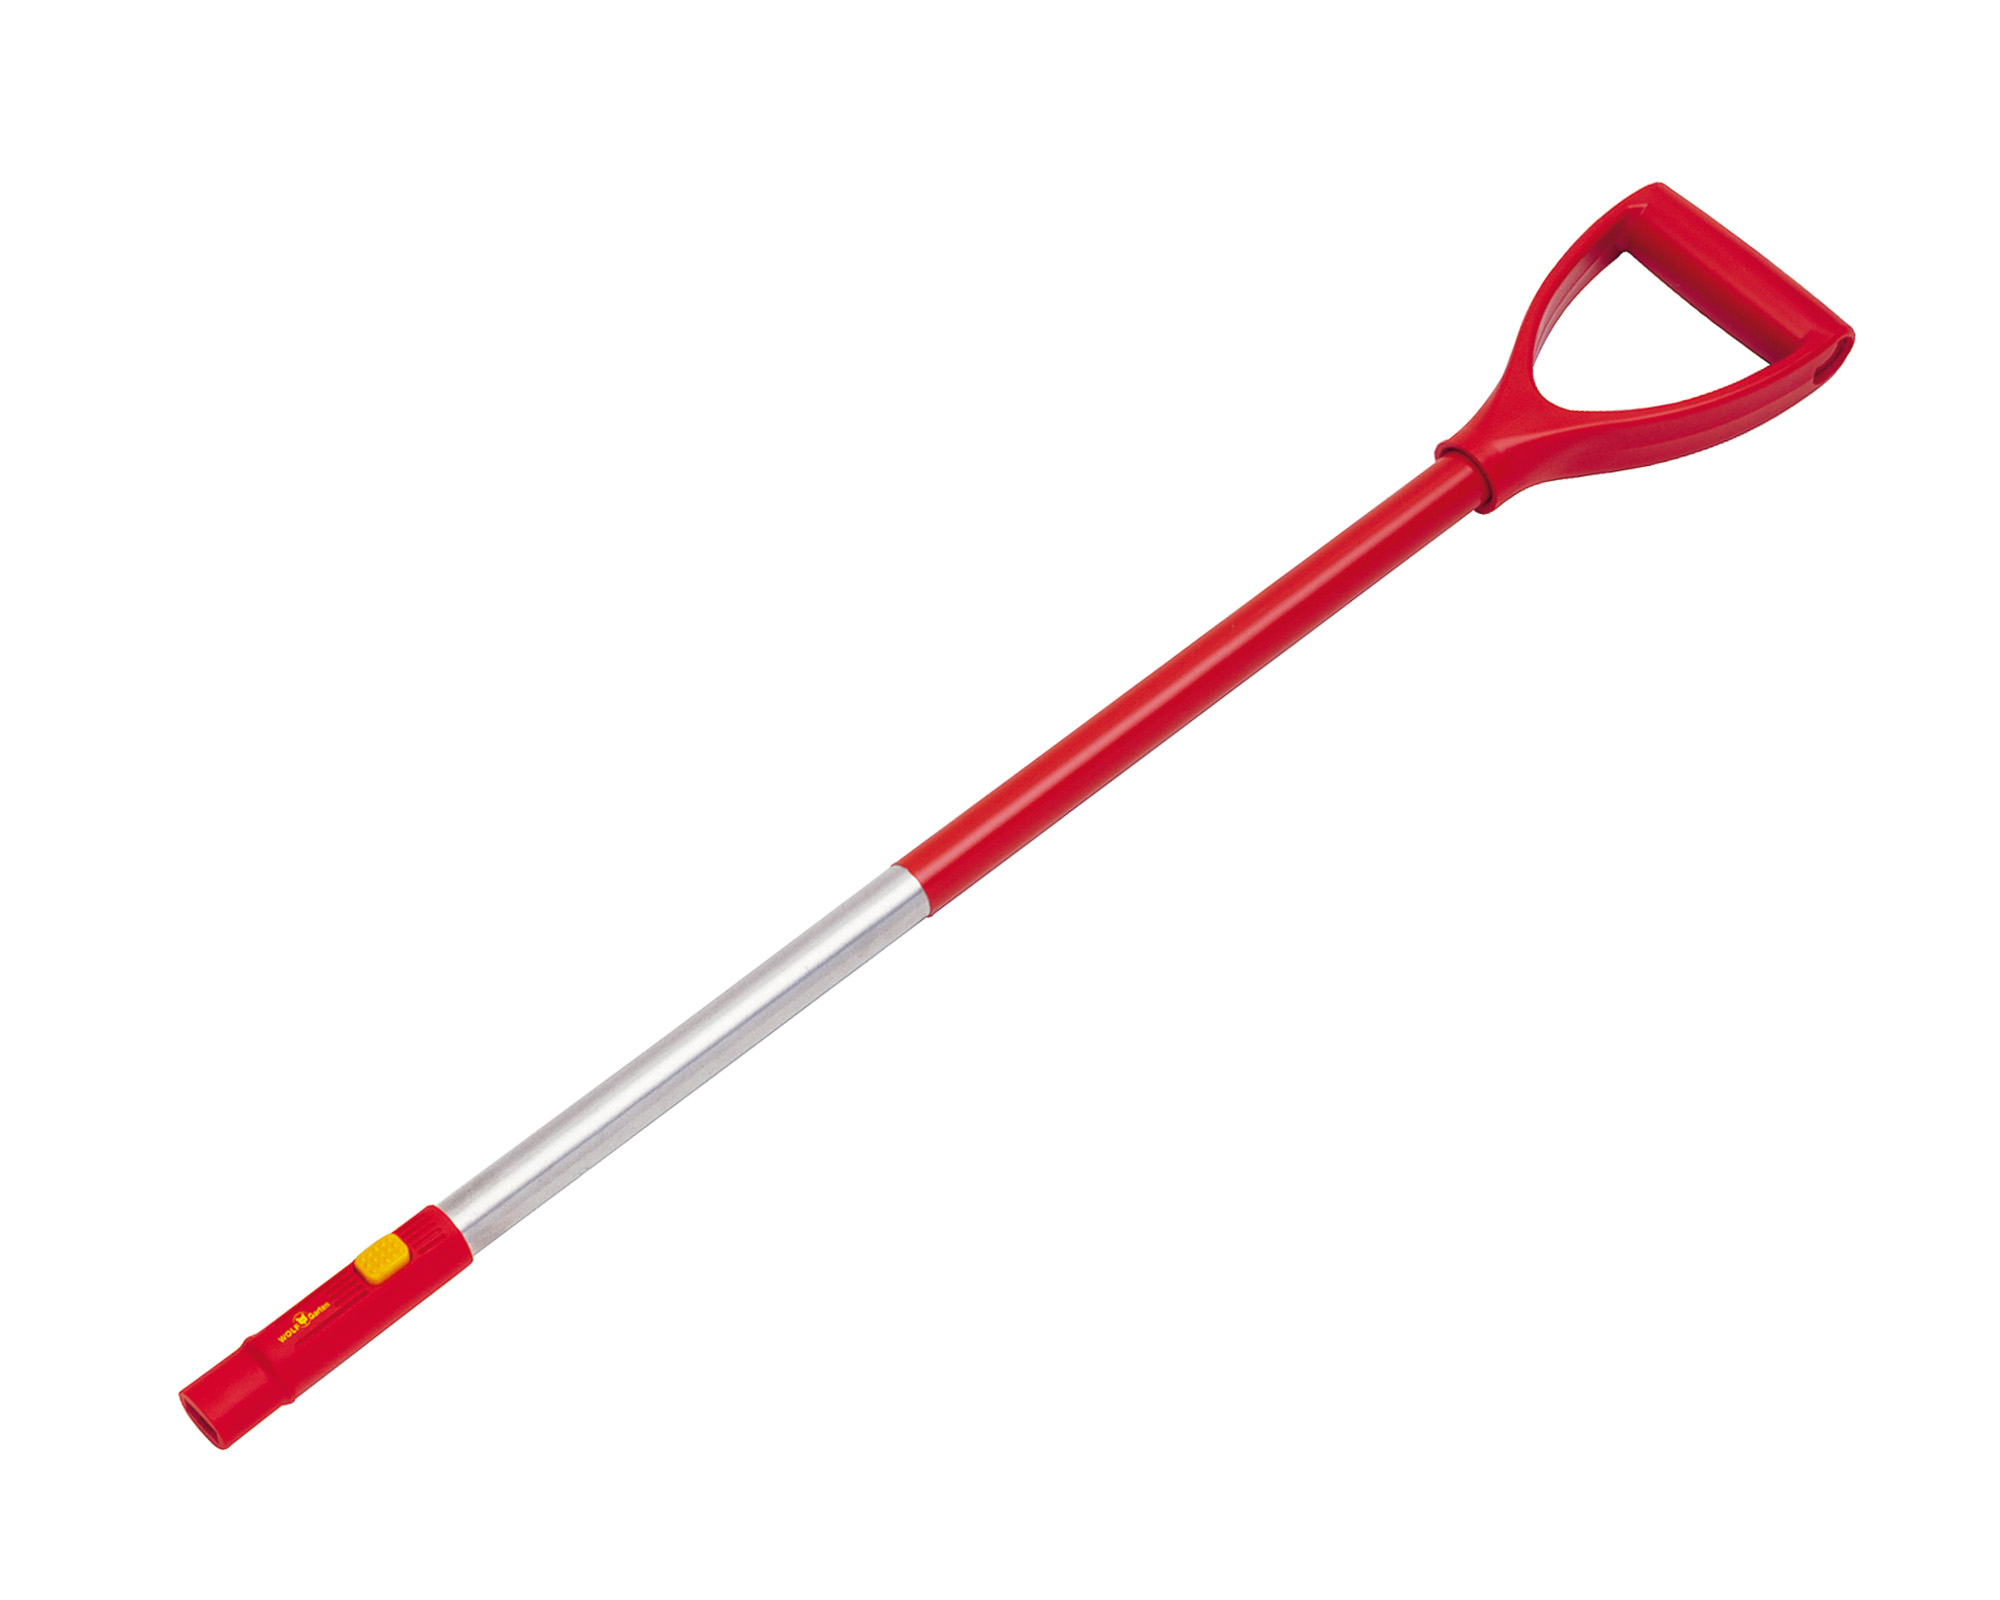 Recommended Handle ZM-AD and/or Aluminium D Handle 85cm long - Multichange Half Moon Lawn Edger (RM-M) - Wolf